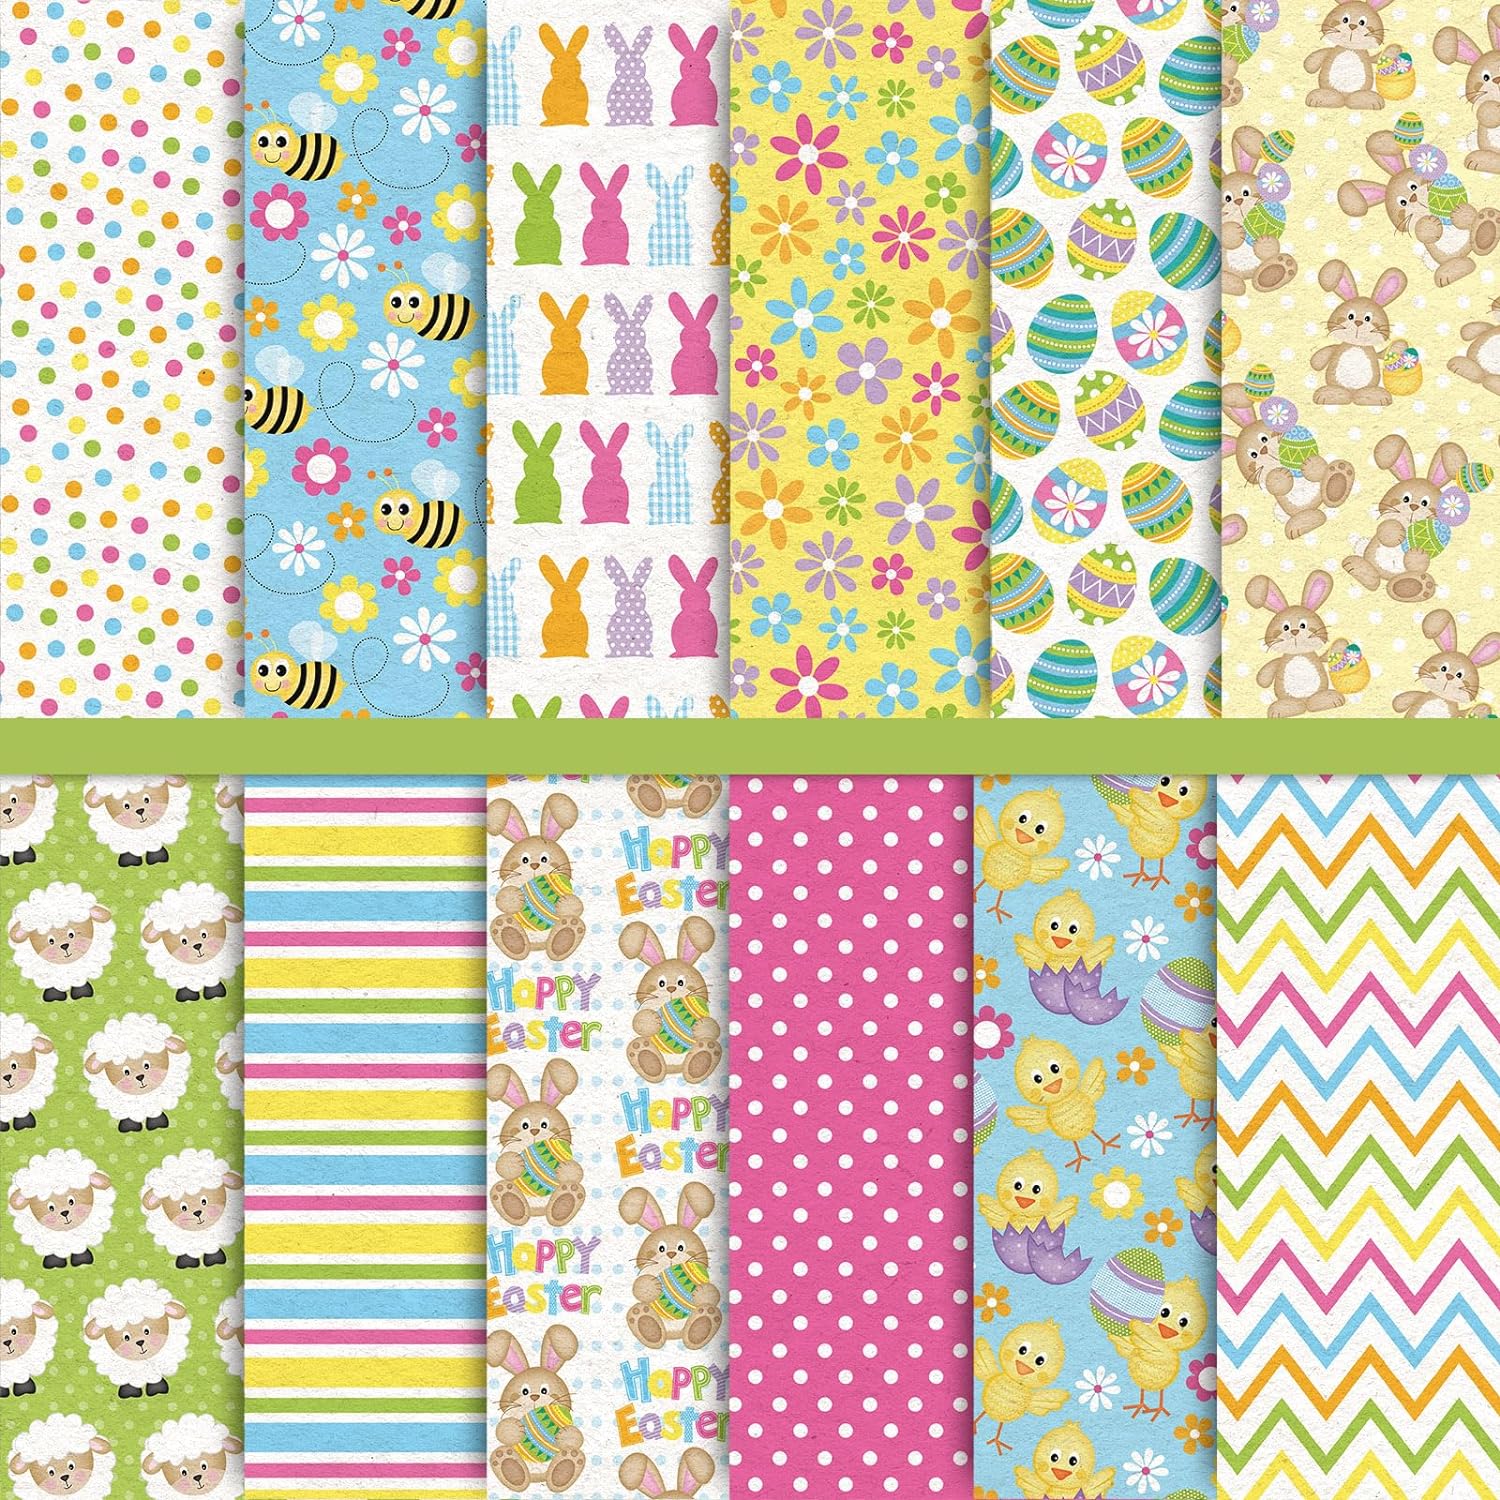 Whaline 12 Designs Easter Pattern Paper 24 Sheet Easter Egg Bunny Chick Pastel Scrapbook Paper Double-Sided Spring Decorative Craft Paper Folded Flat for Card Making Photo Album Decor, 30 x 30cm